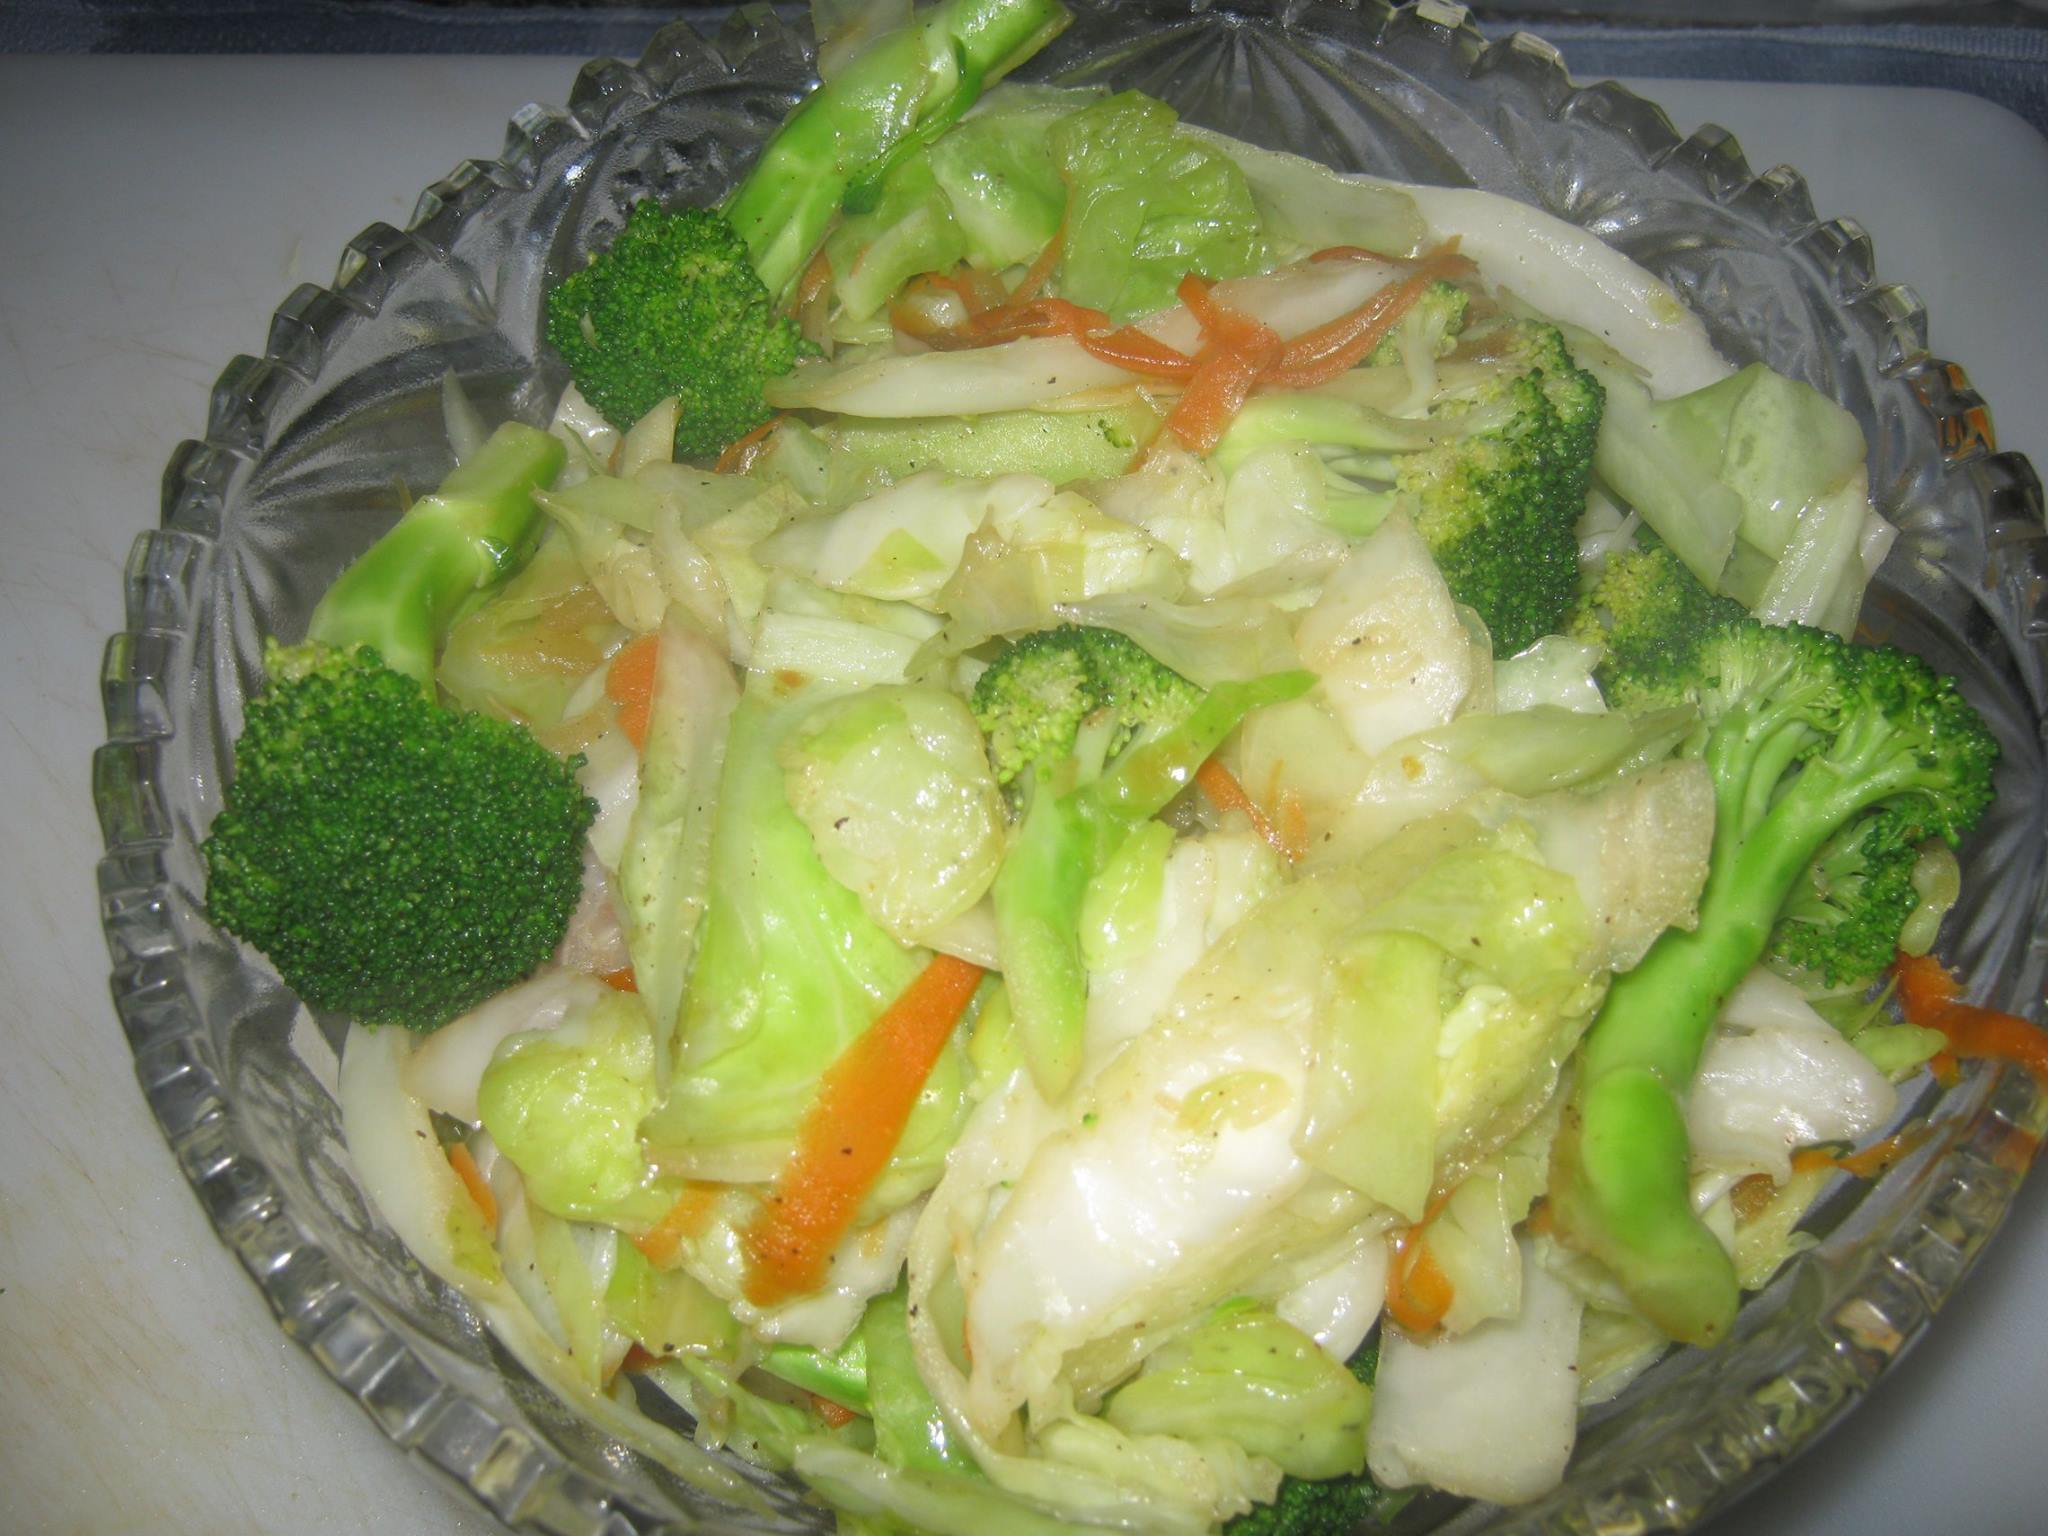 Mixed vegetable recipe in a glass bowl